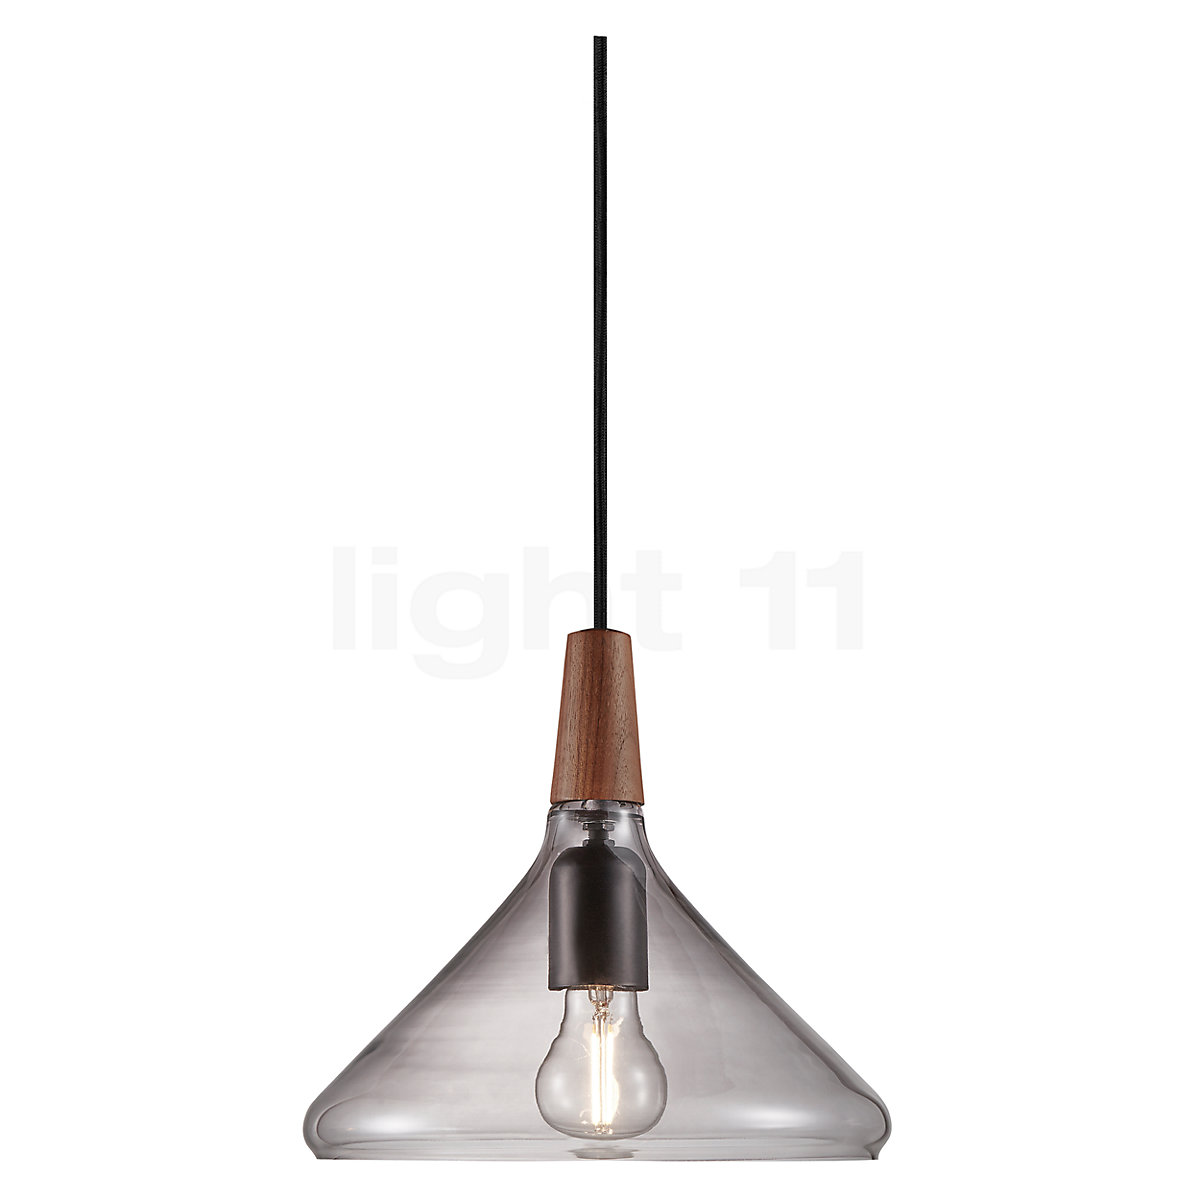 the Nori at People Pendant Light Buy Design for